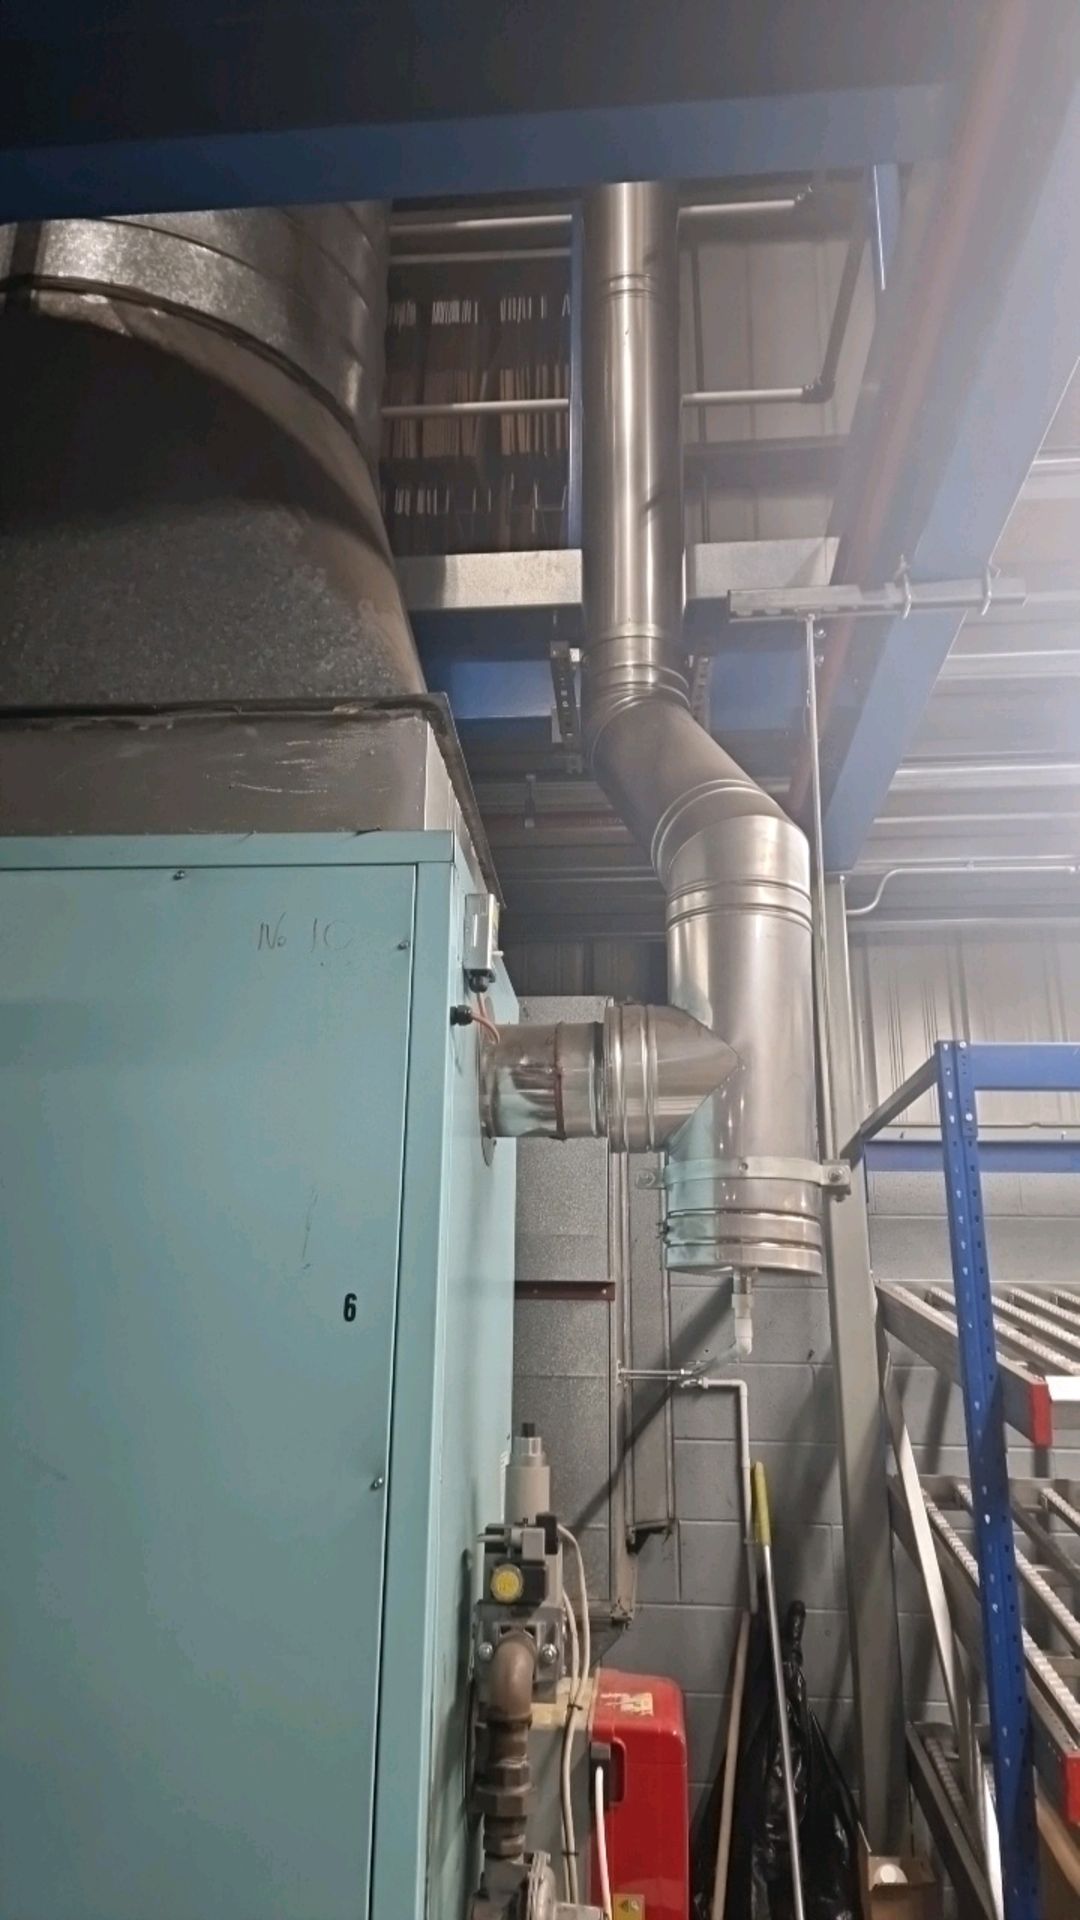 Powrmatic Industrial Heating Unit - Image 10 of 14